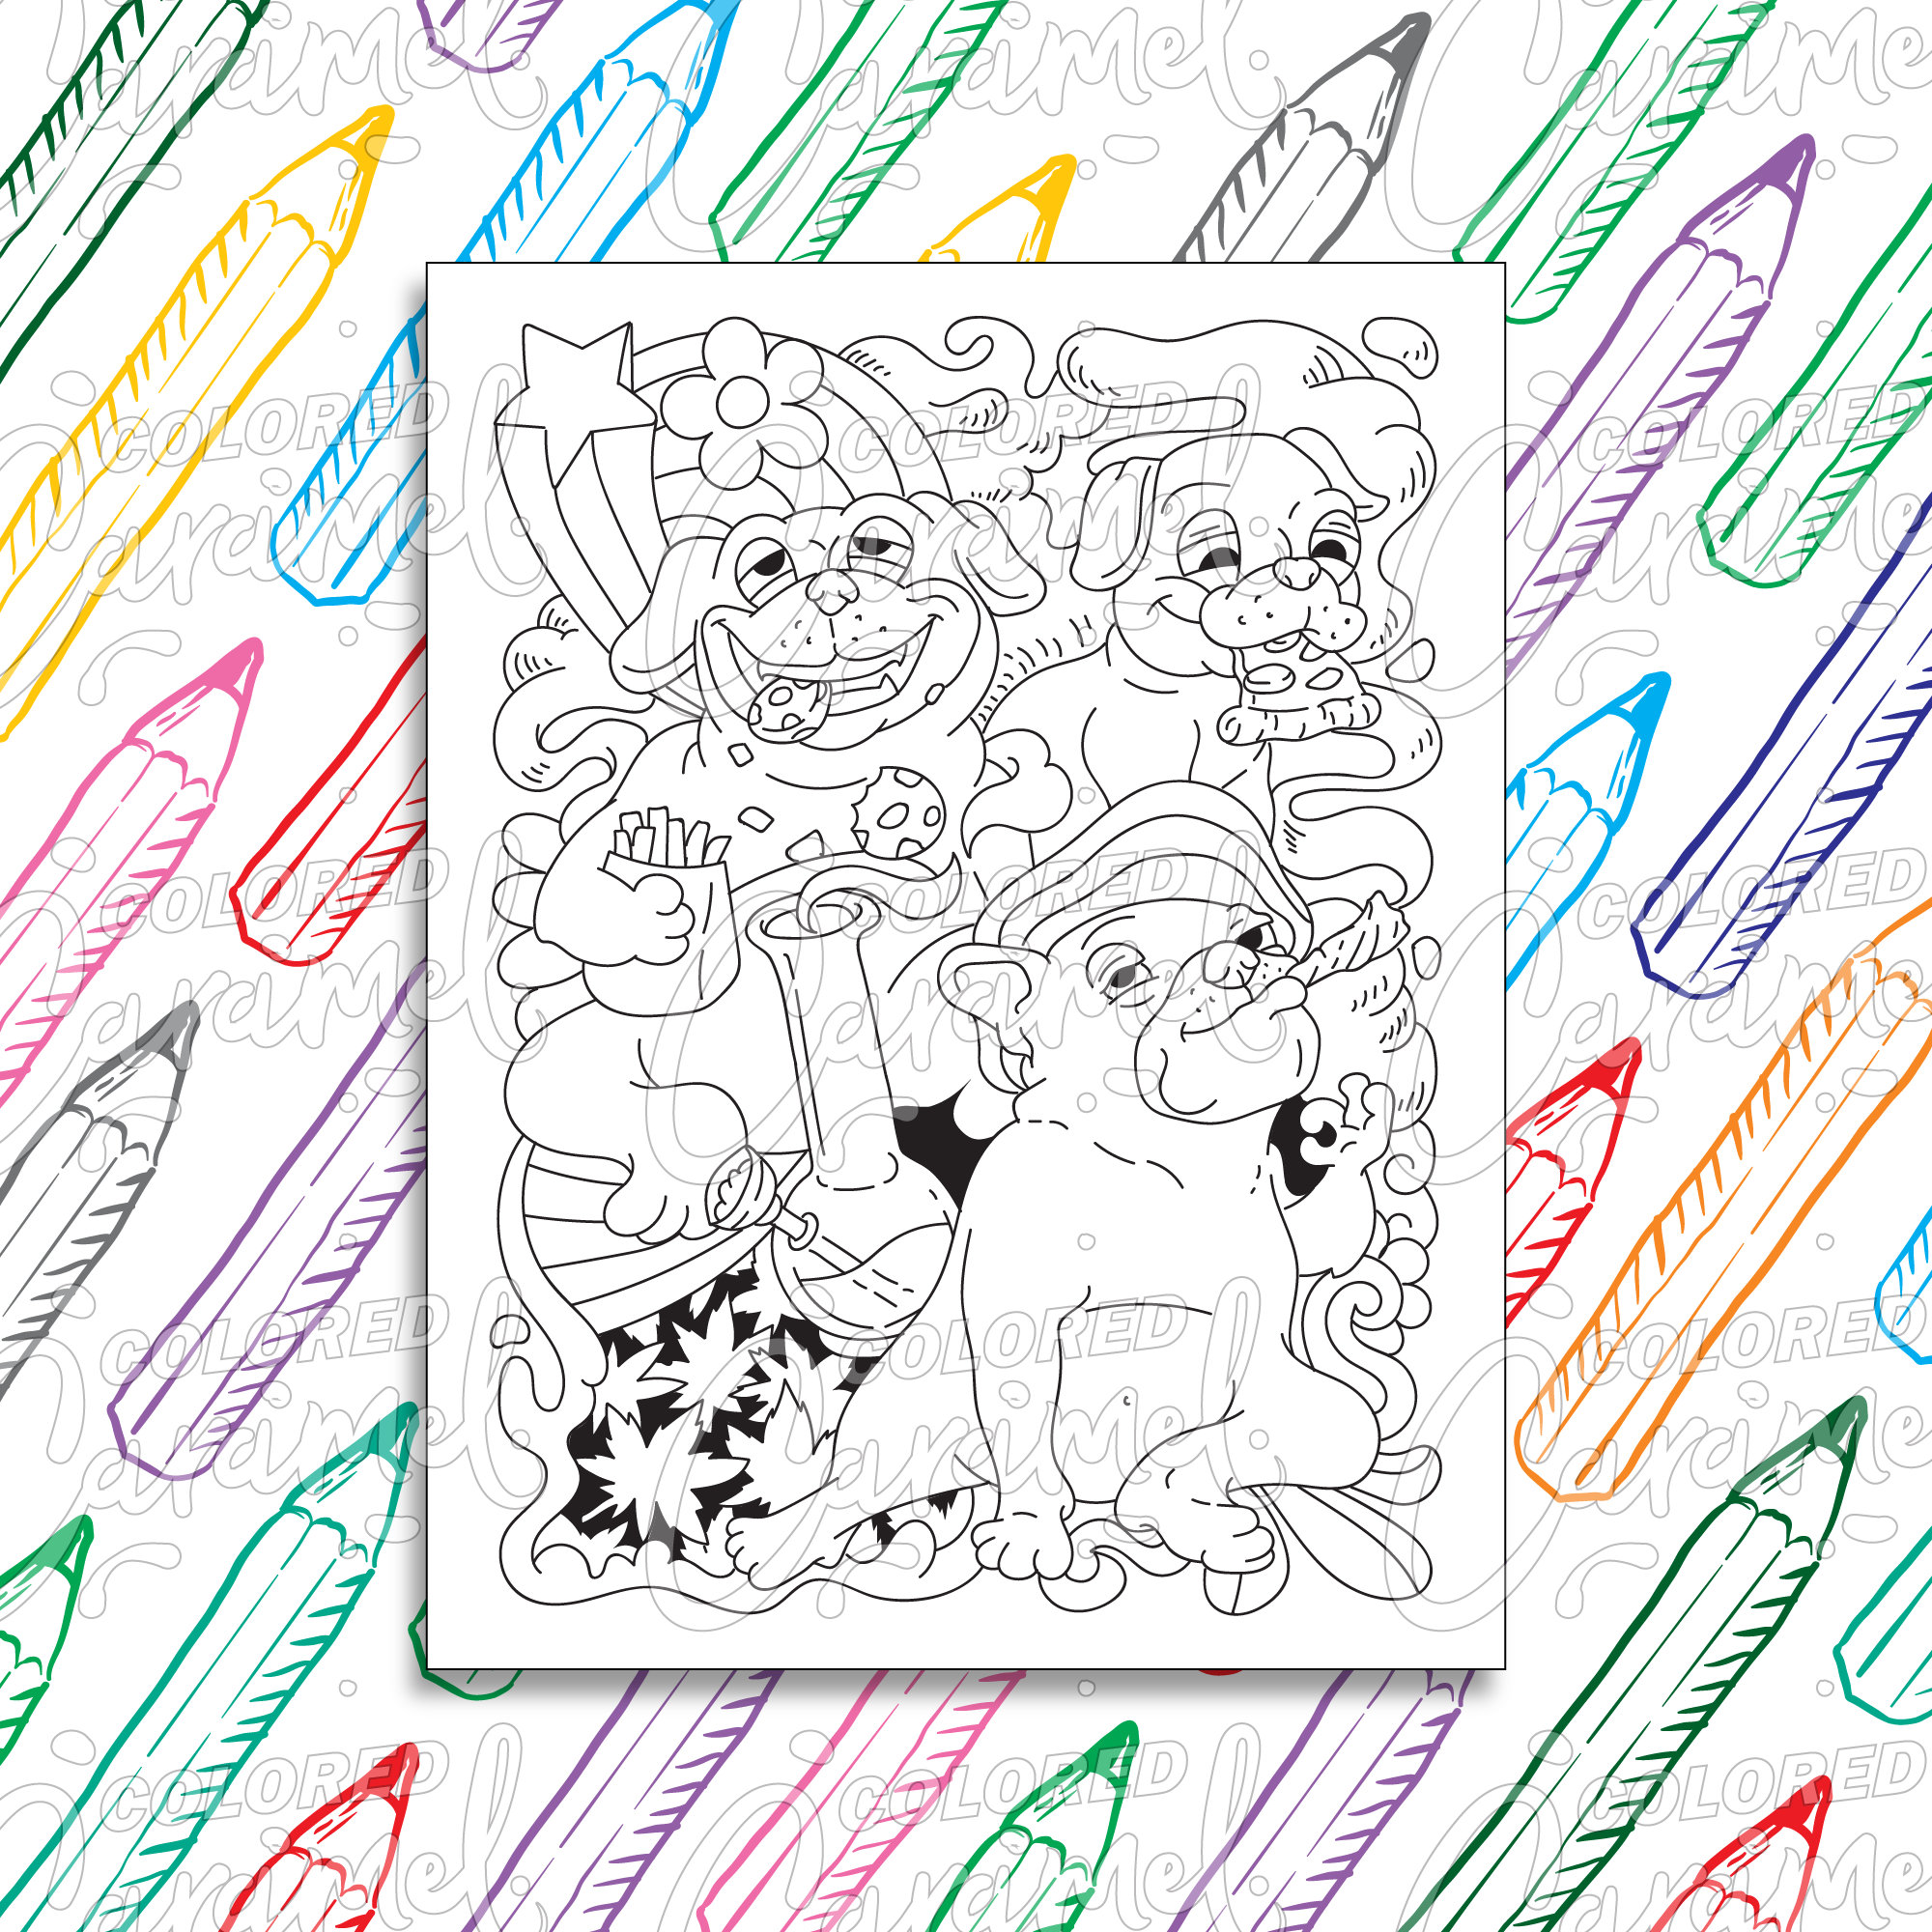 Stoner Coloring Page Digital Download PDF, Trippy, Funny and Cute Pug Dogs Smoking Weed, Printable Psychedelic Drawing & Illustration